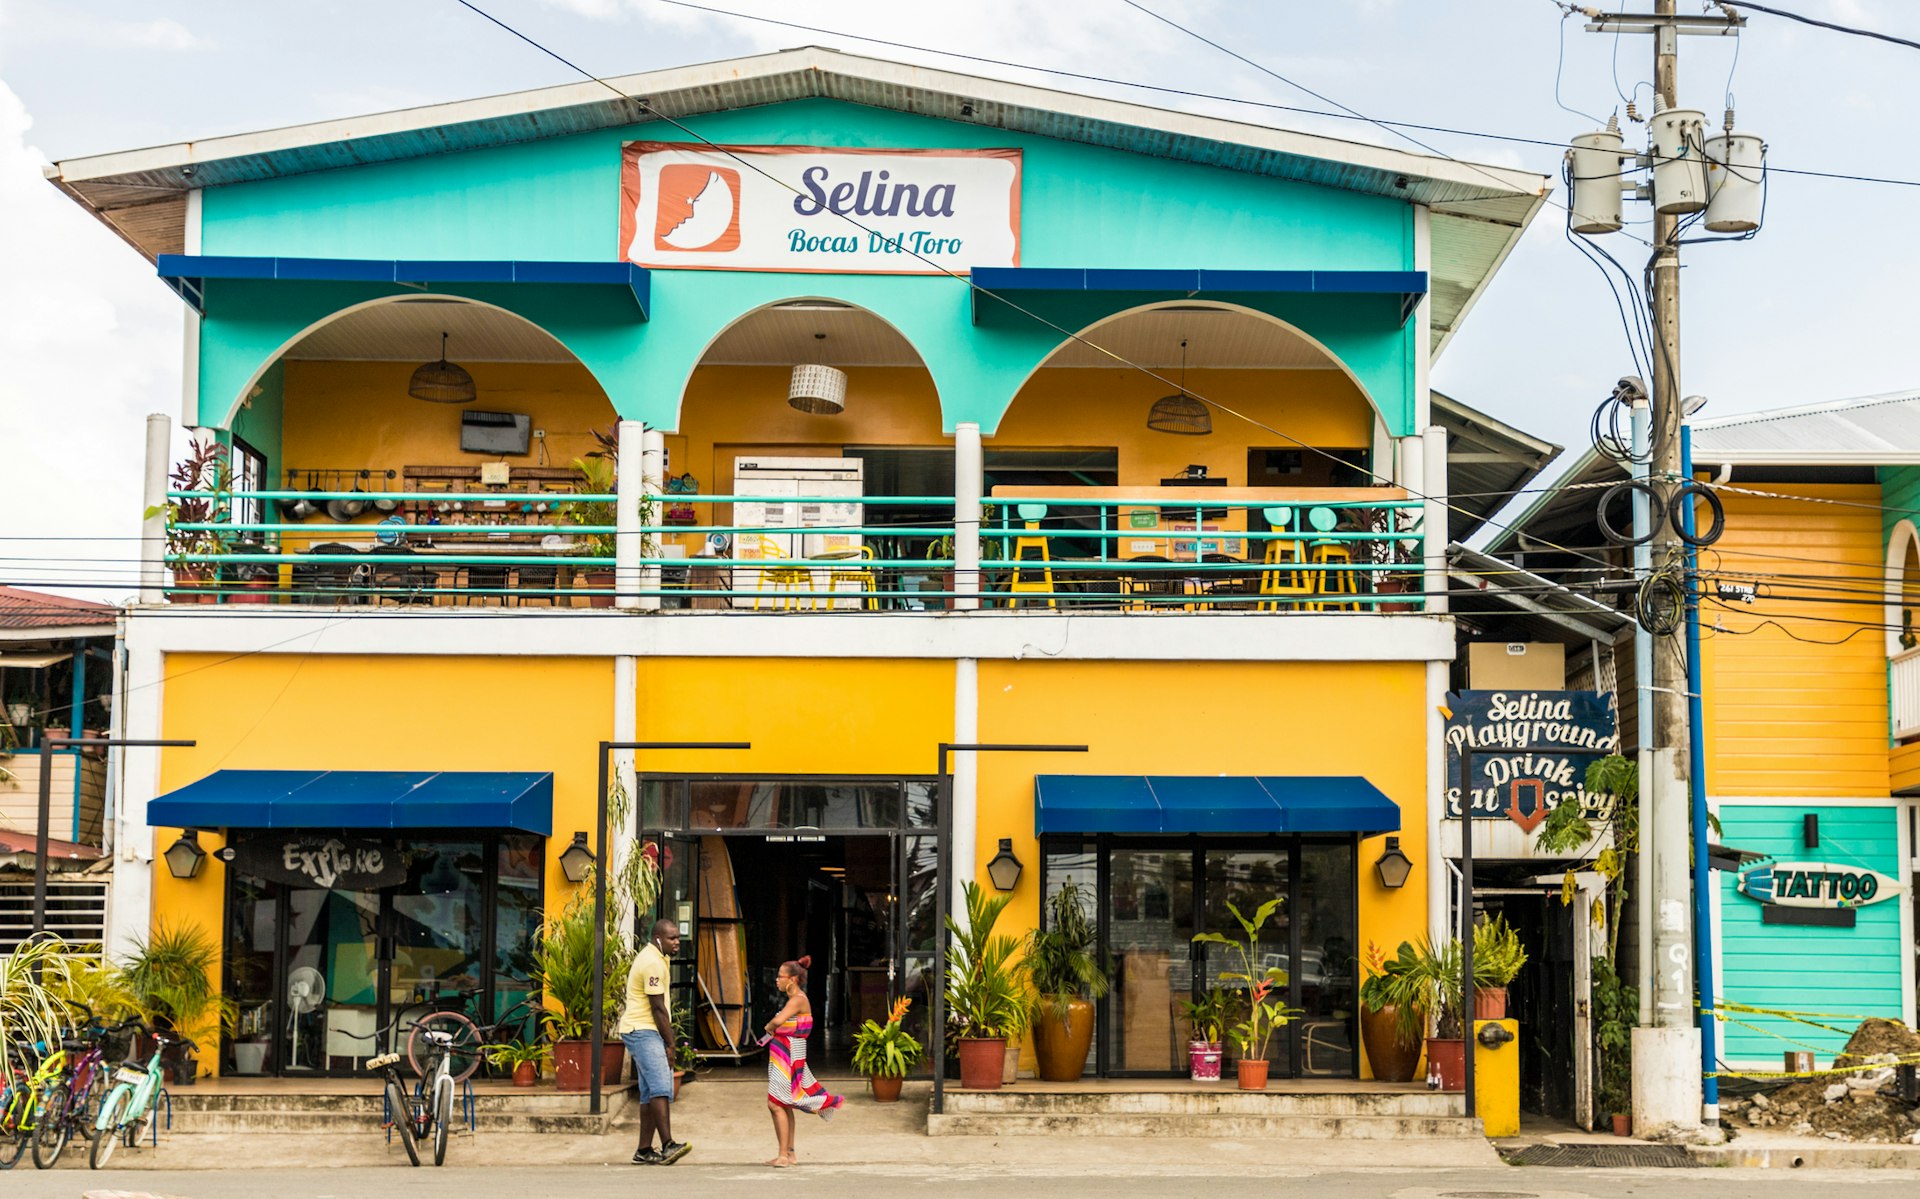 A view of Selinas hostel on the island of Bocas del toro in Panama.